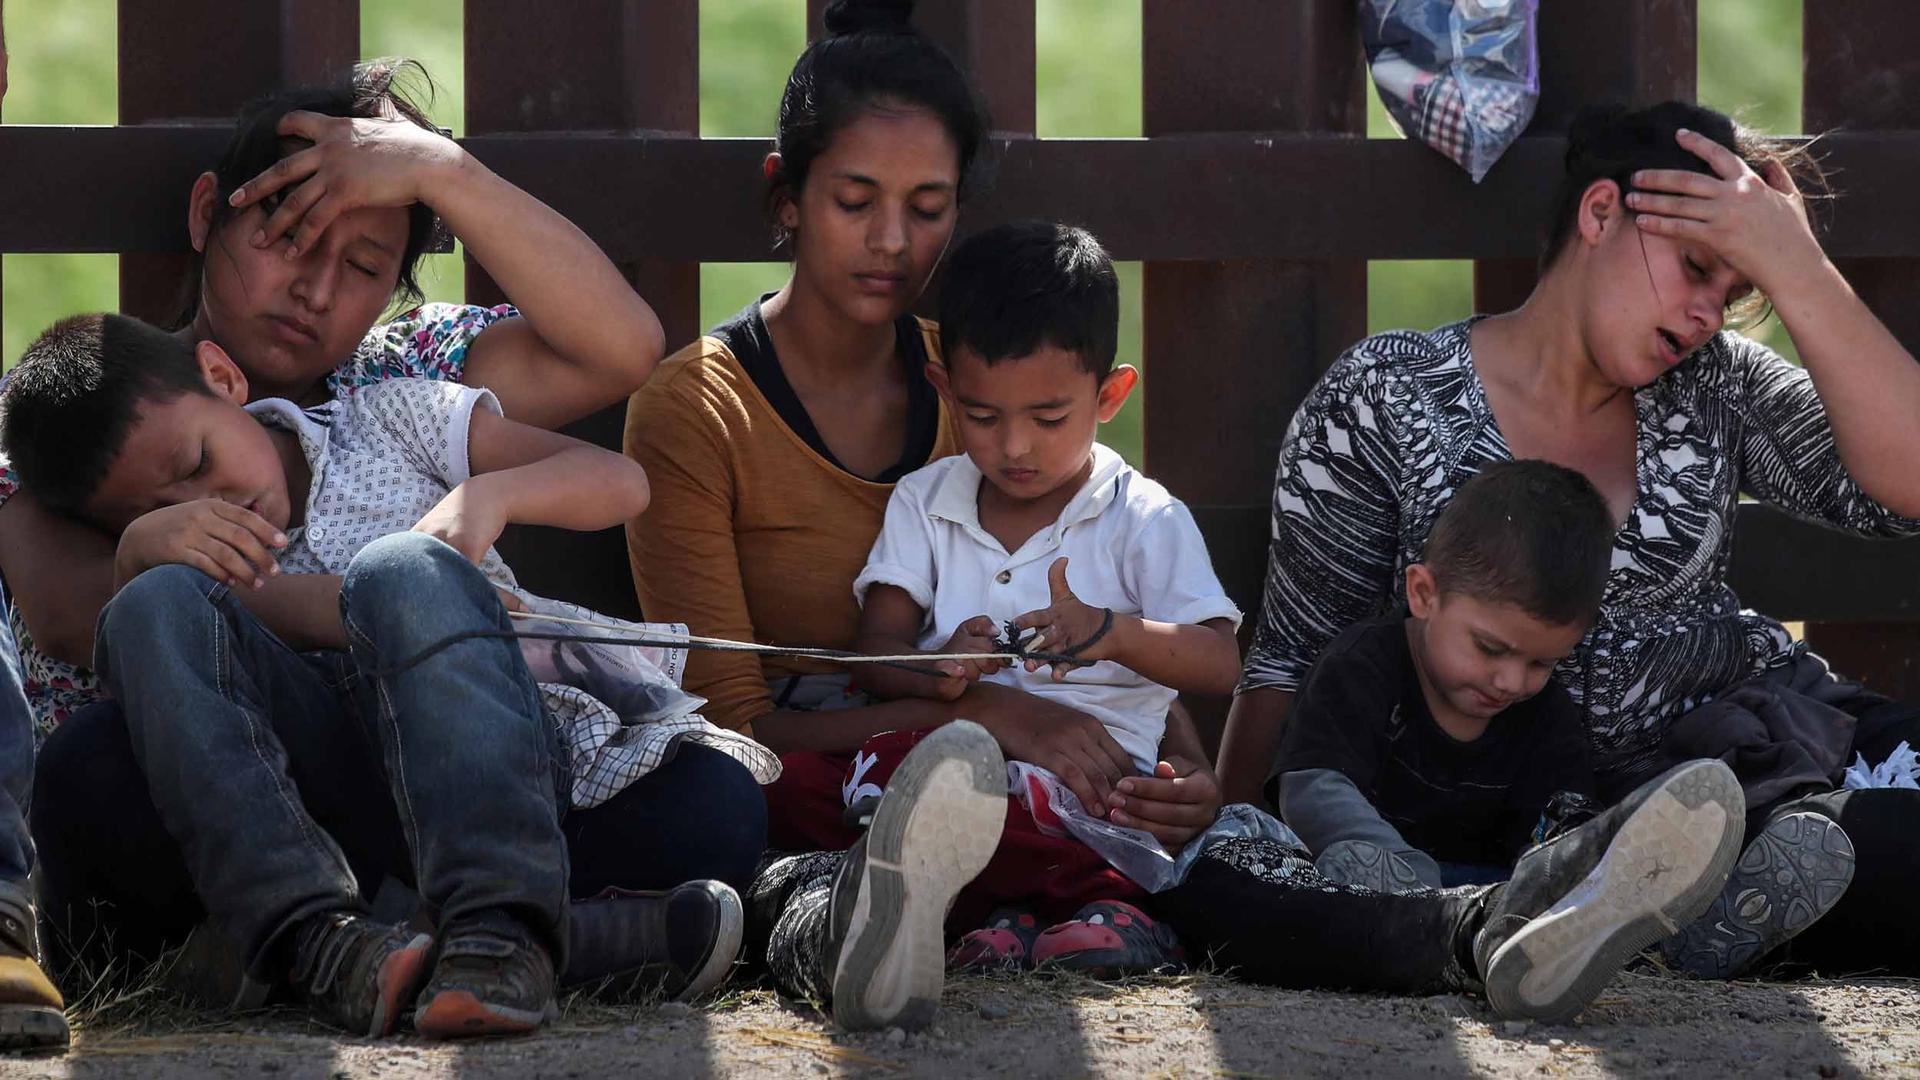 Three women rest against a fence with their children in their laps